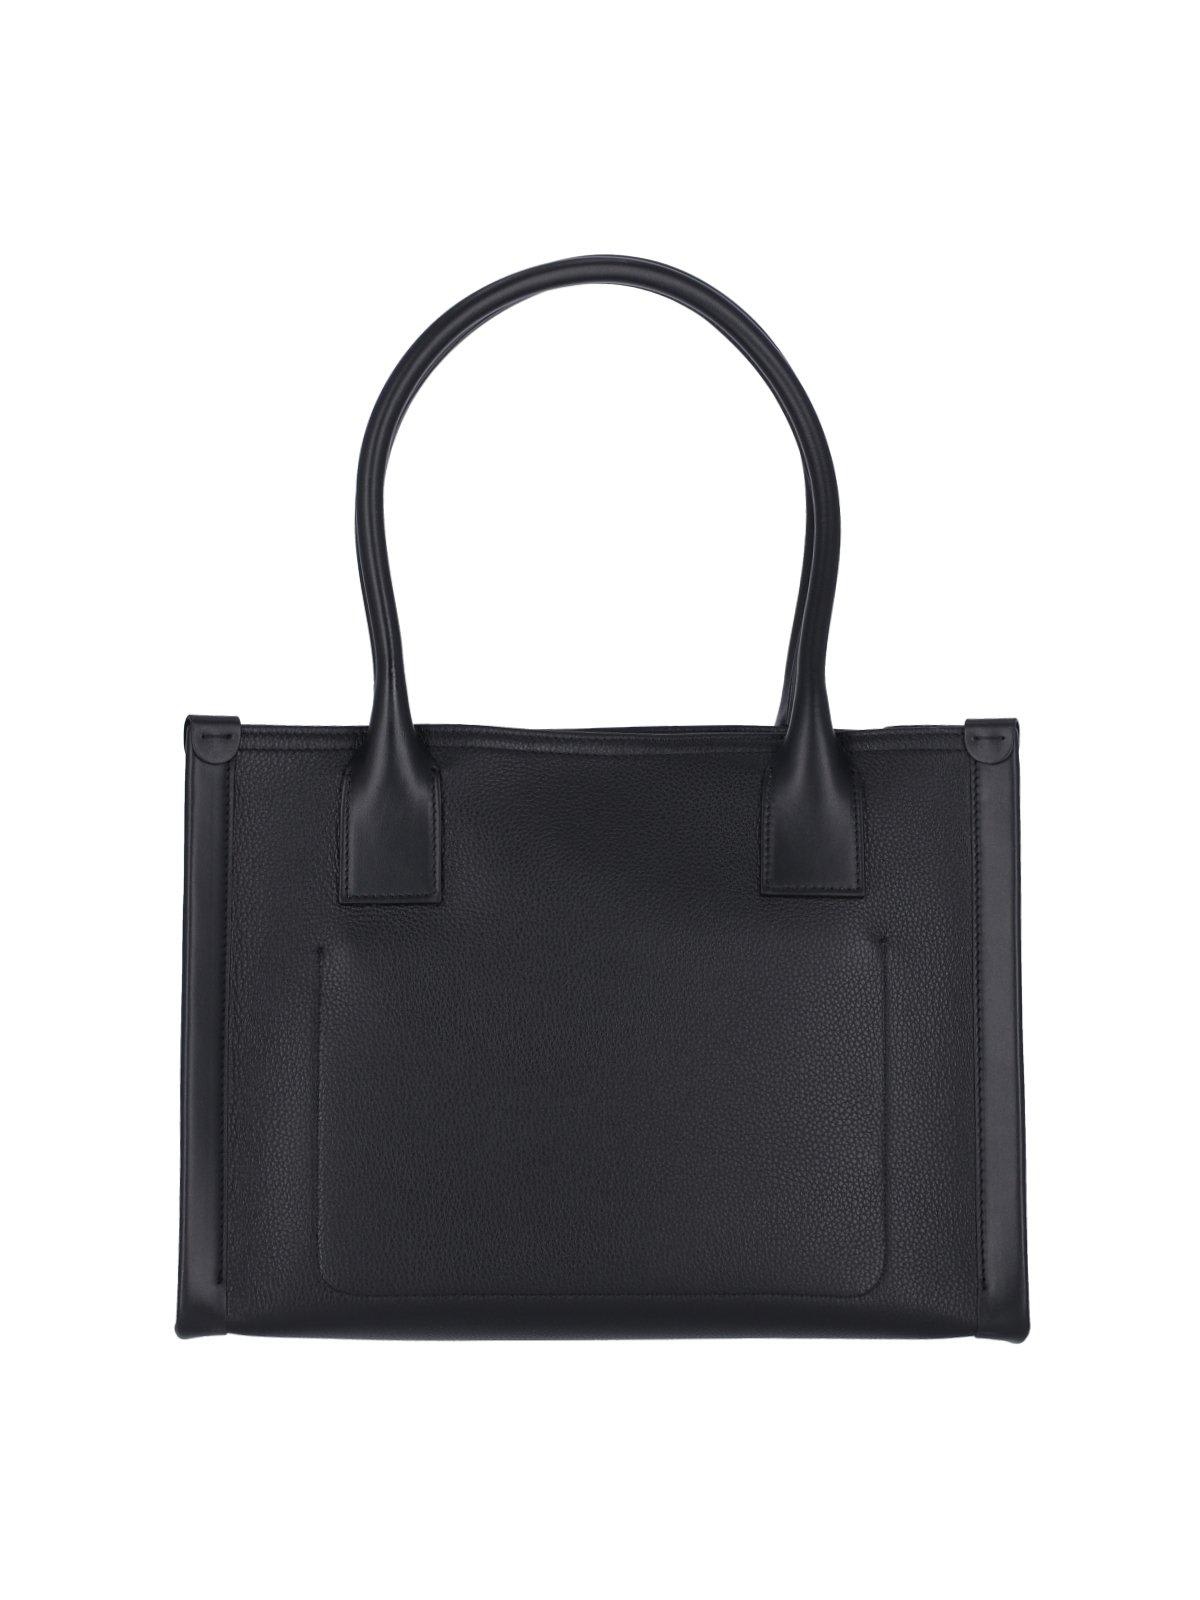 Shop Christian Louboutin By My Side Small Tote Bag In Black/black/black